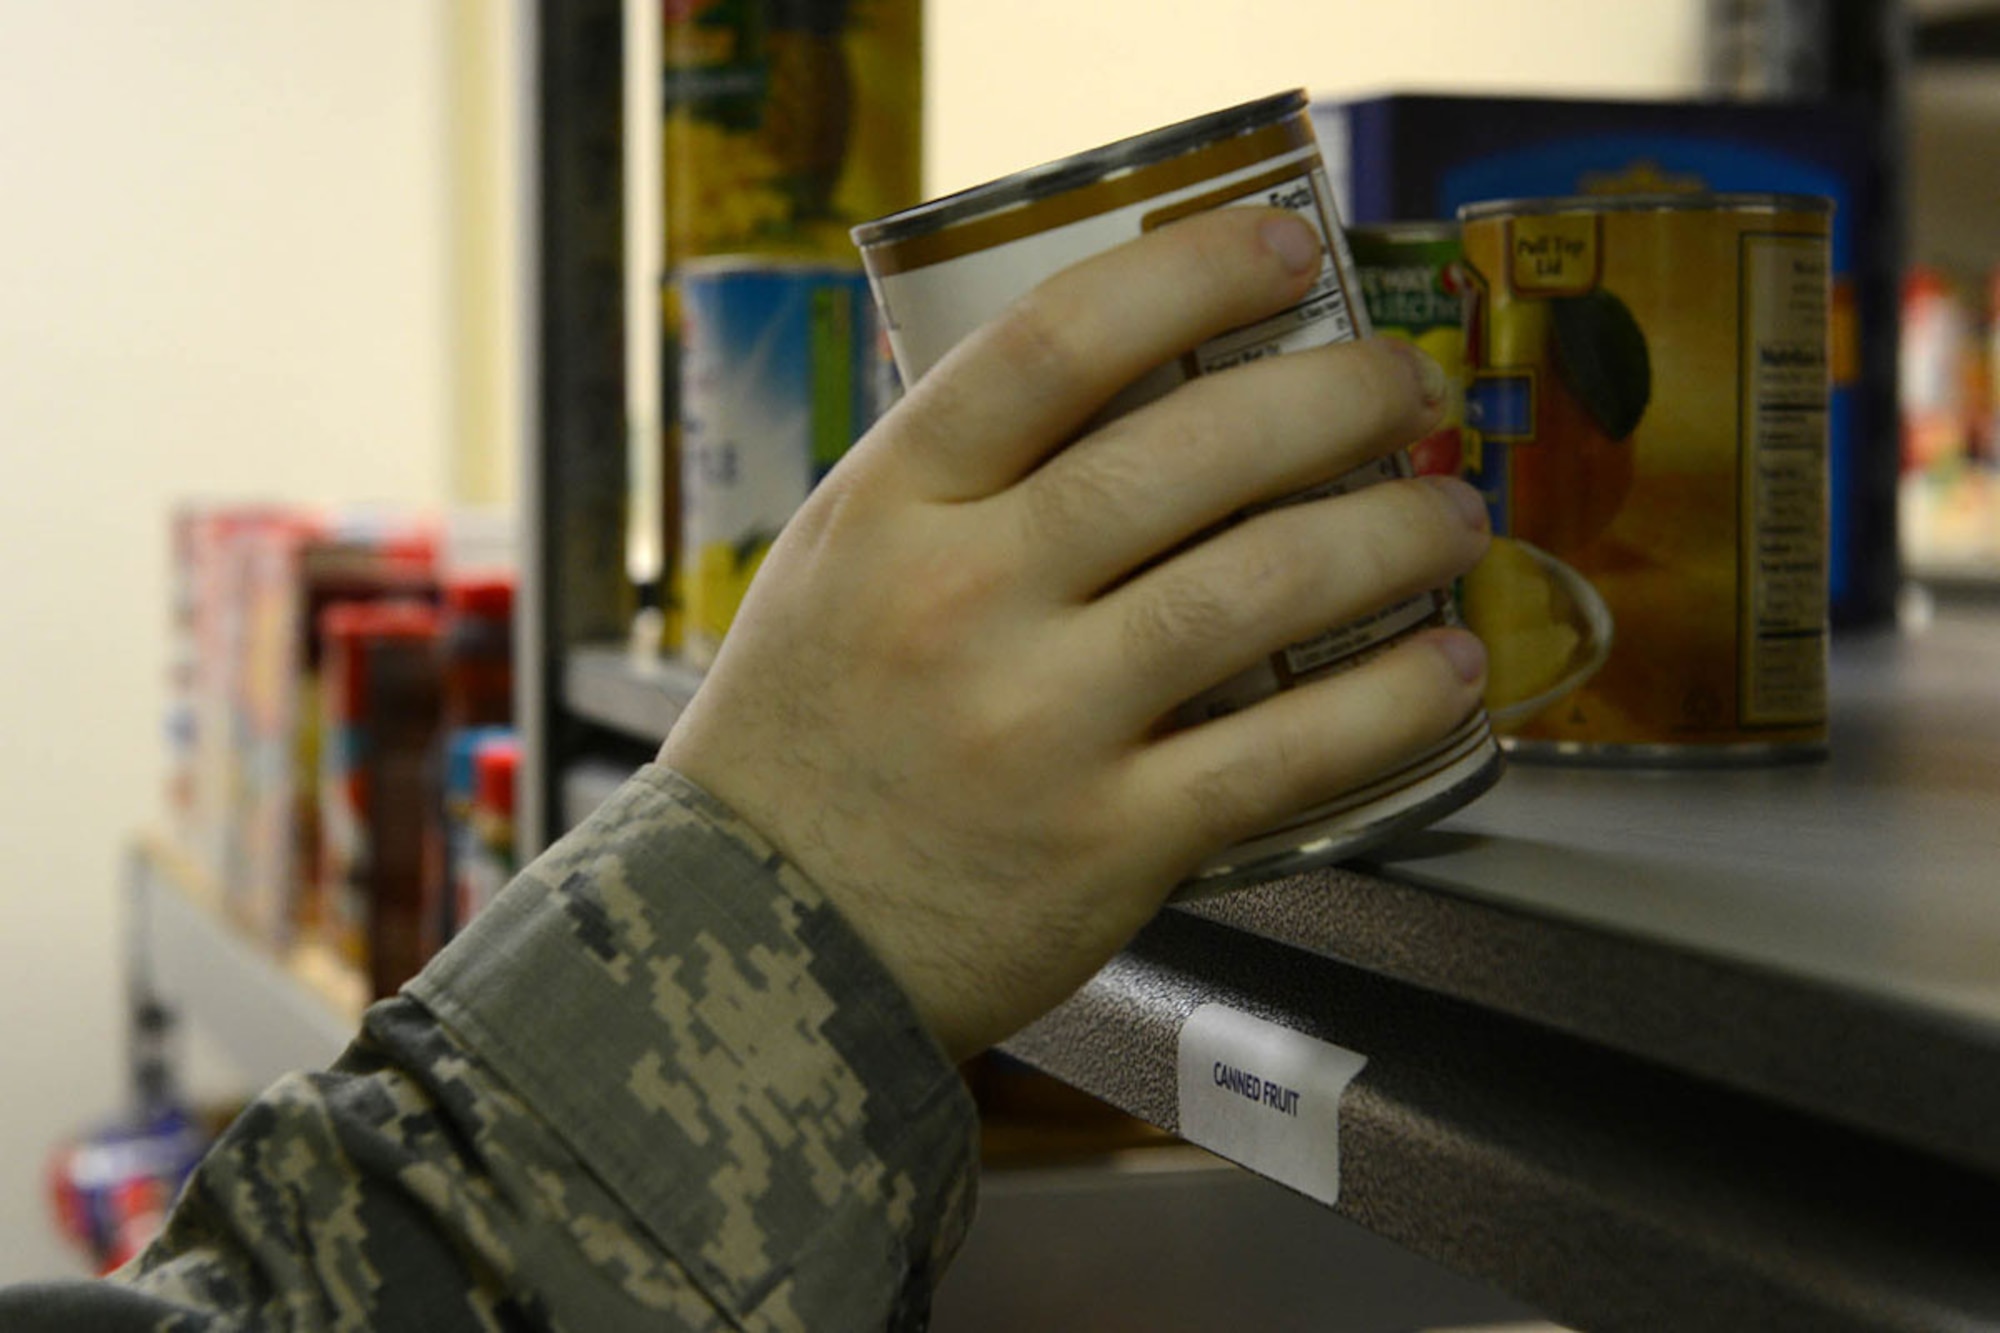 The Armed Services YMCA of Alaska offers two food pantries on Joint Base Elmendorf-Richardson. The food pantries on the installation assist military families who experience unbudgeted expenses during the month. (U.S. Air Force photo by Airman 1st Class Javier Alvarez)